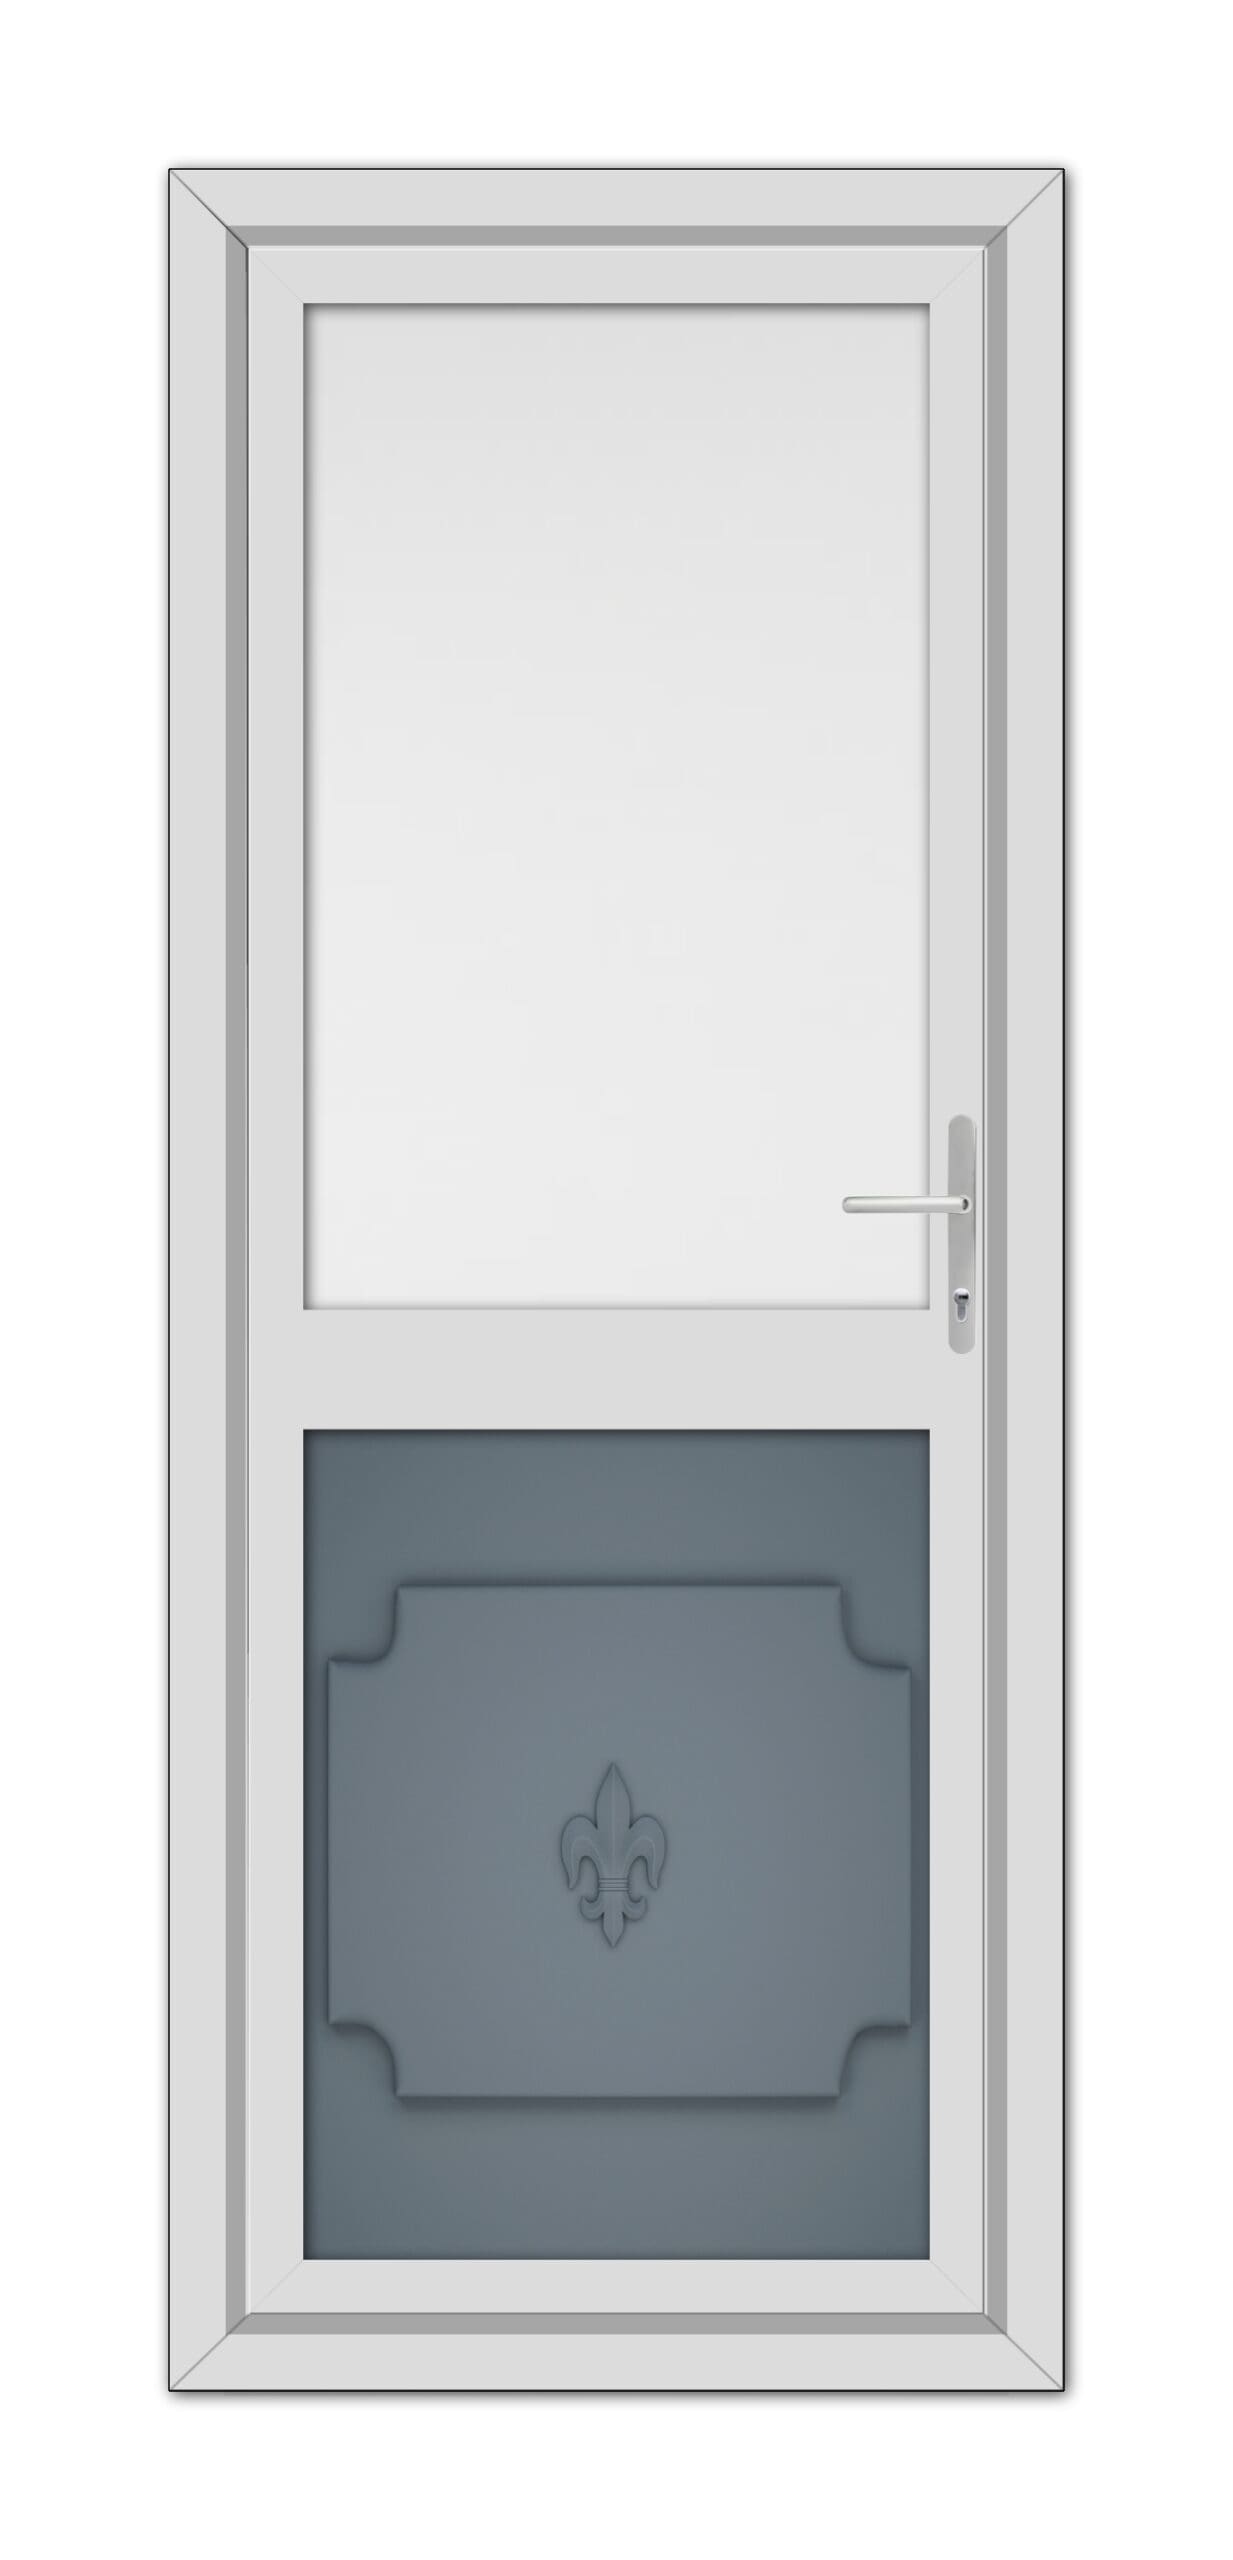 Slate Grey Abbey Half uPVC Back Door with a large transparent window on top, a frosted glass panel with a fleur-de-lis design in the middle, and a modern handle on the right.